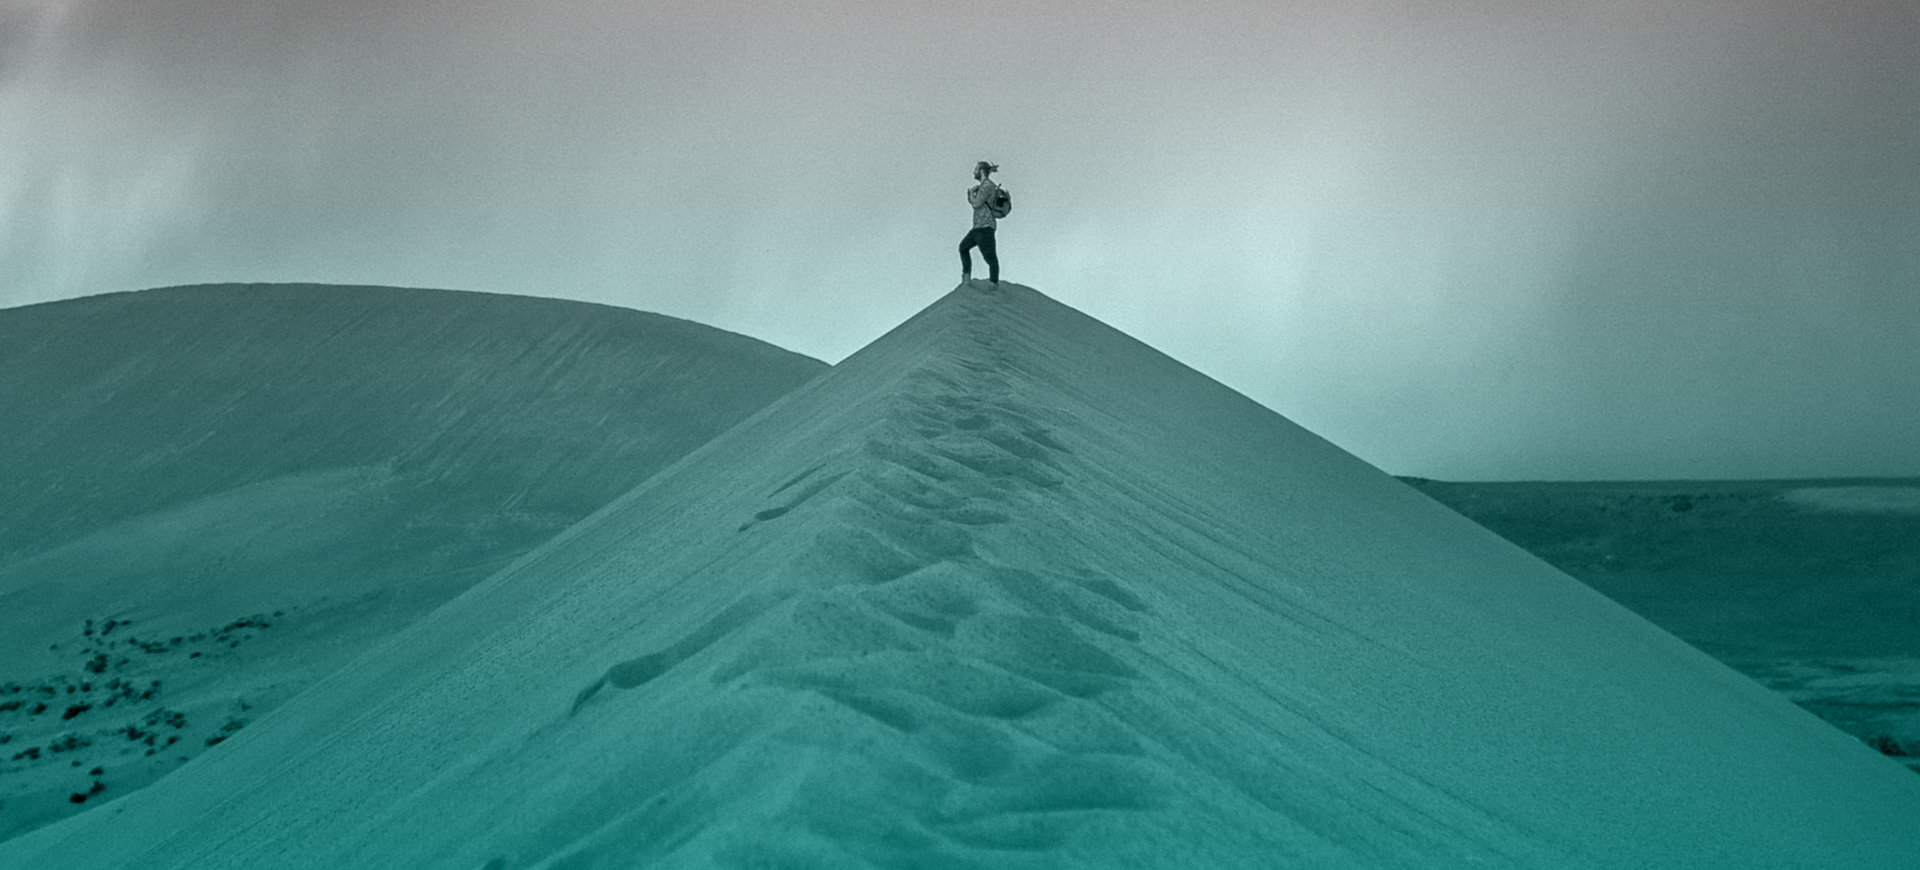 Backpacker standing on top of sand dune